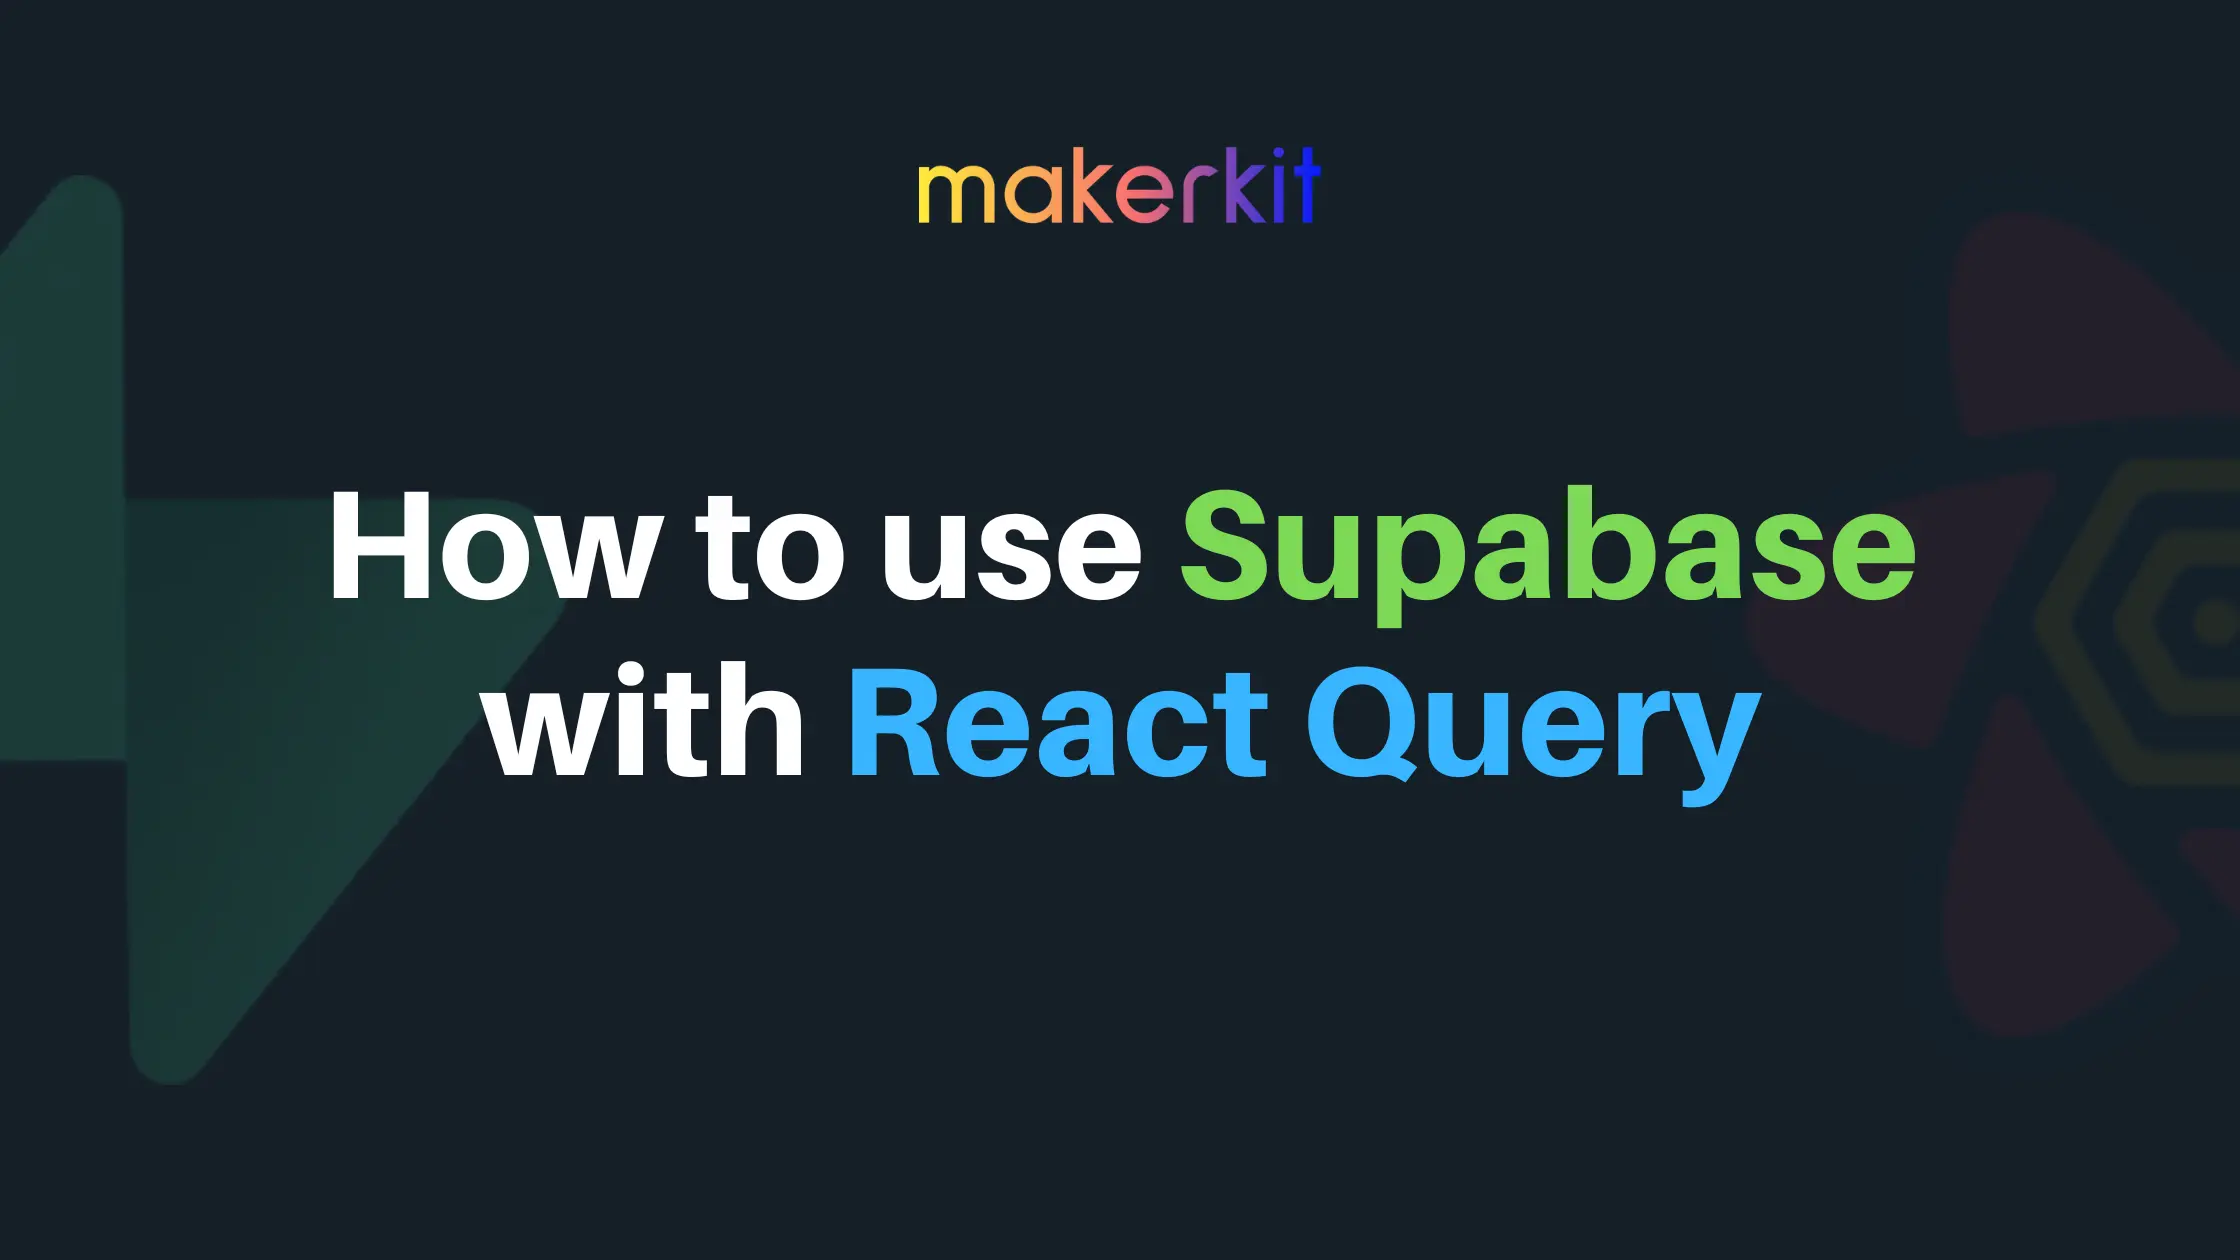 Cover Image for How to use Supabase with React Query